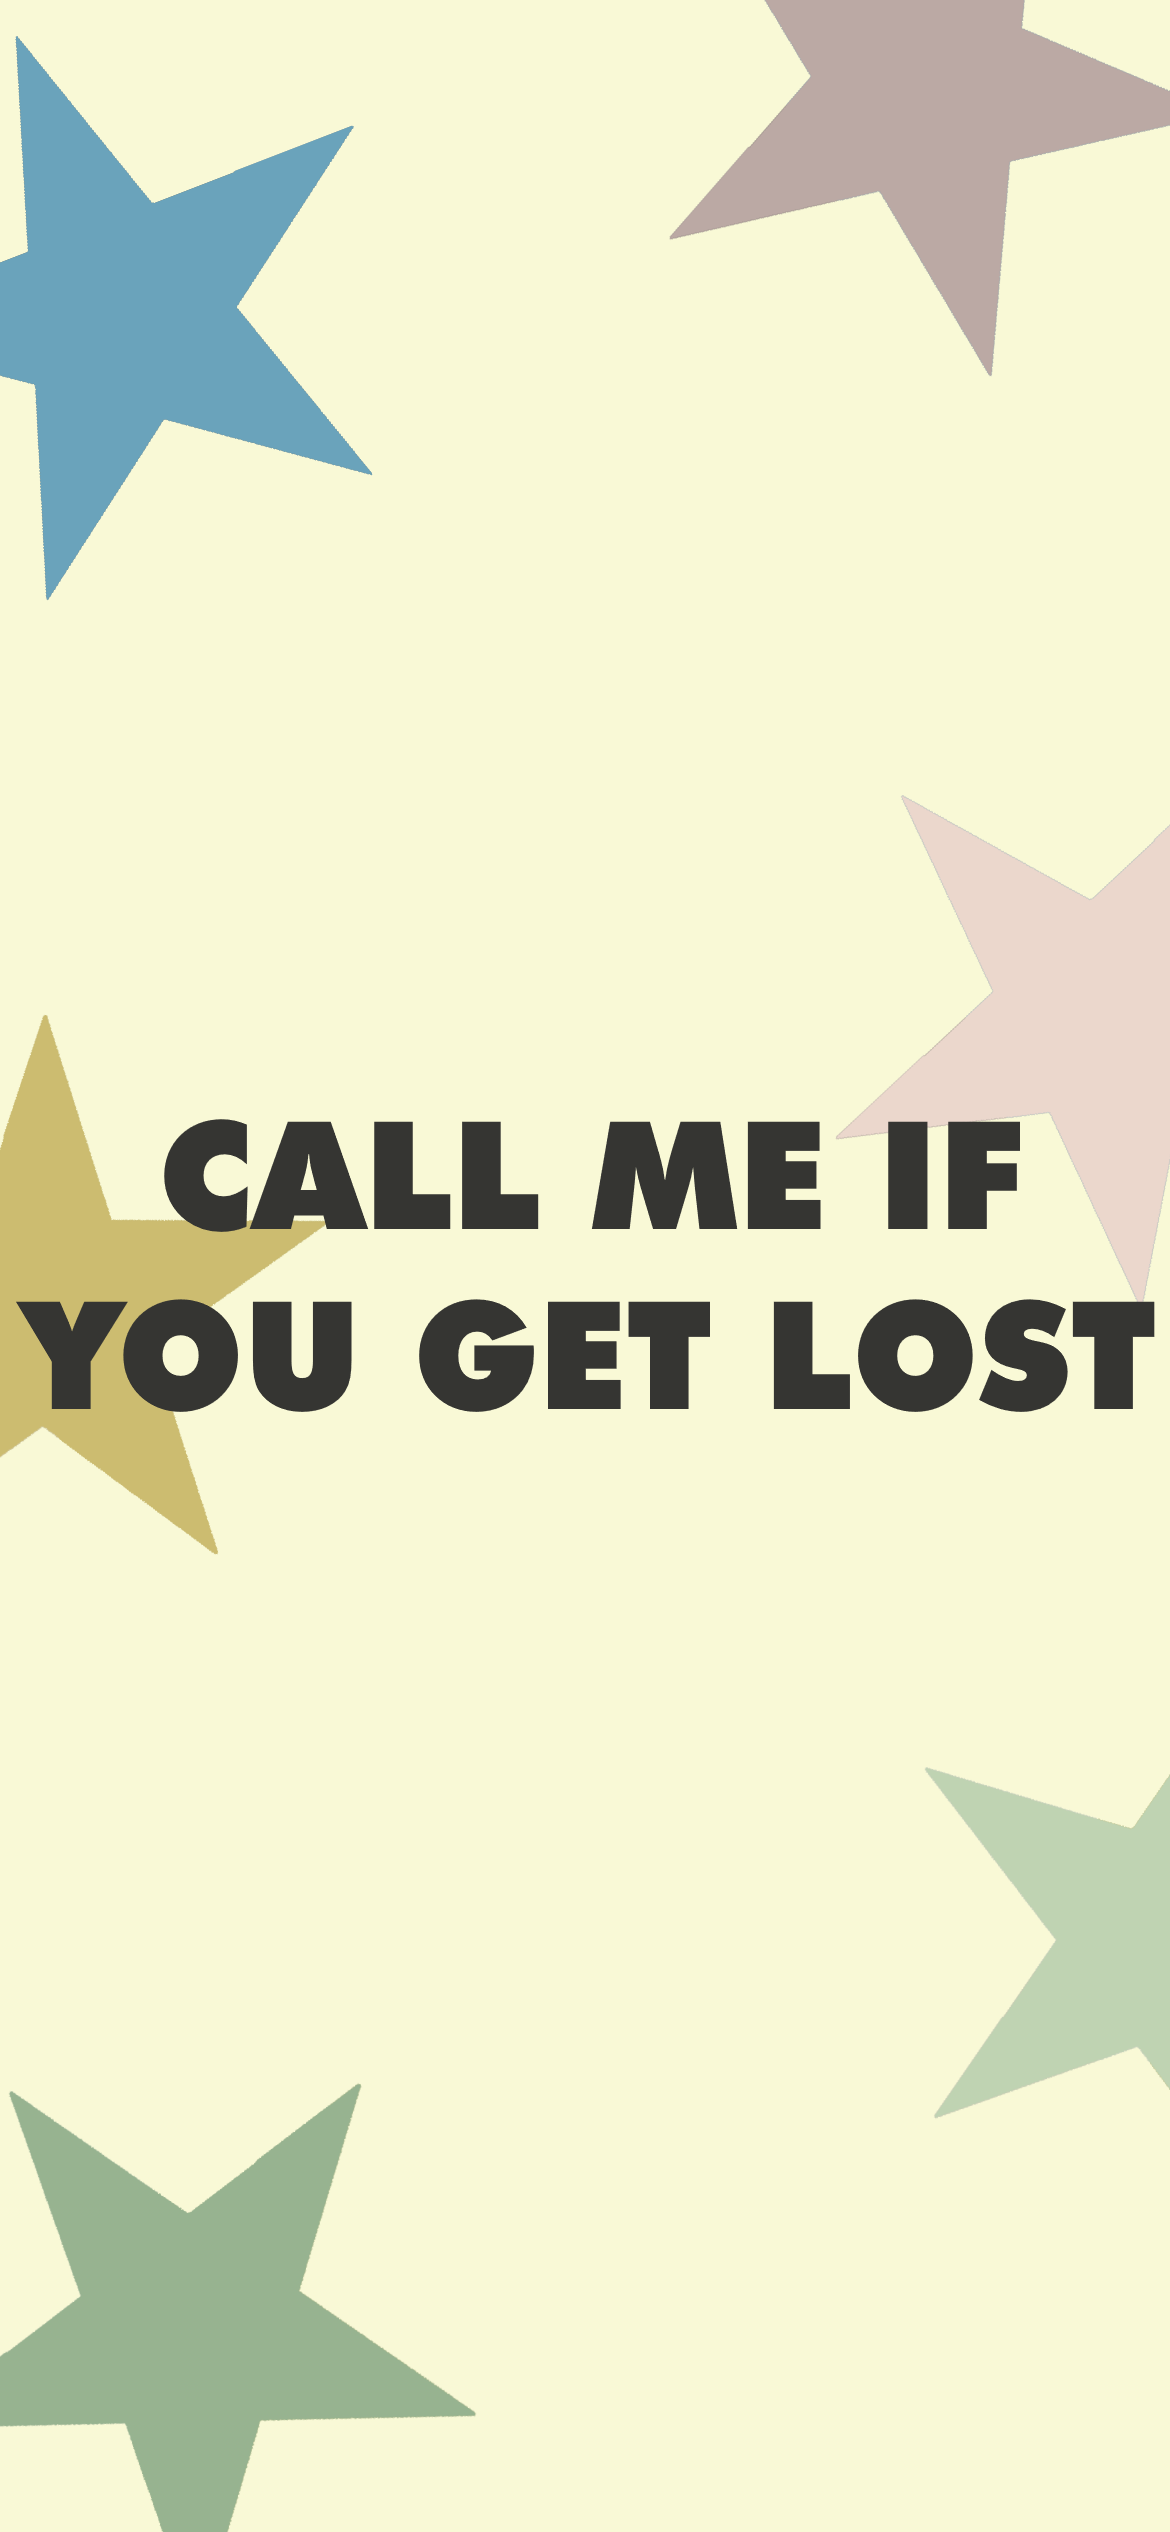 call me if you get lost card